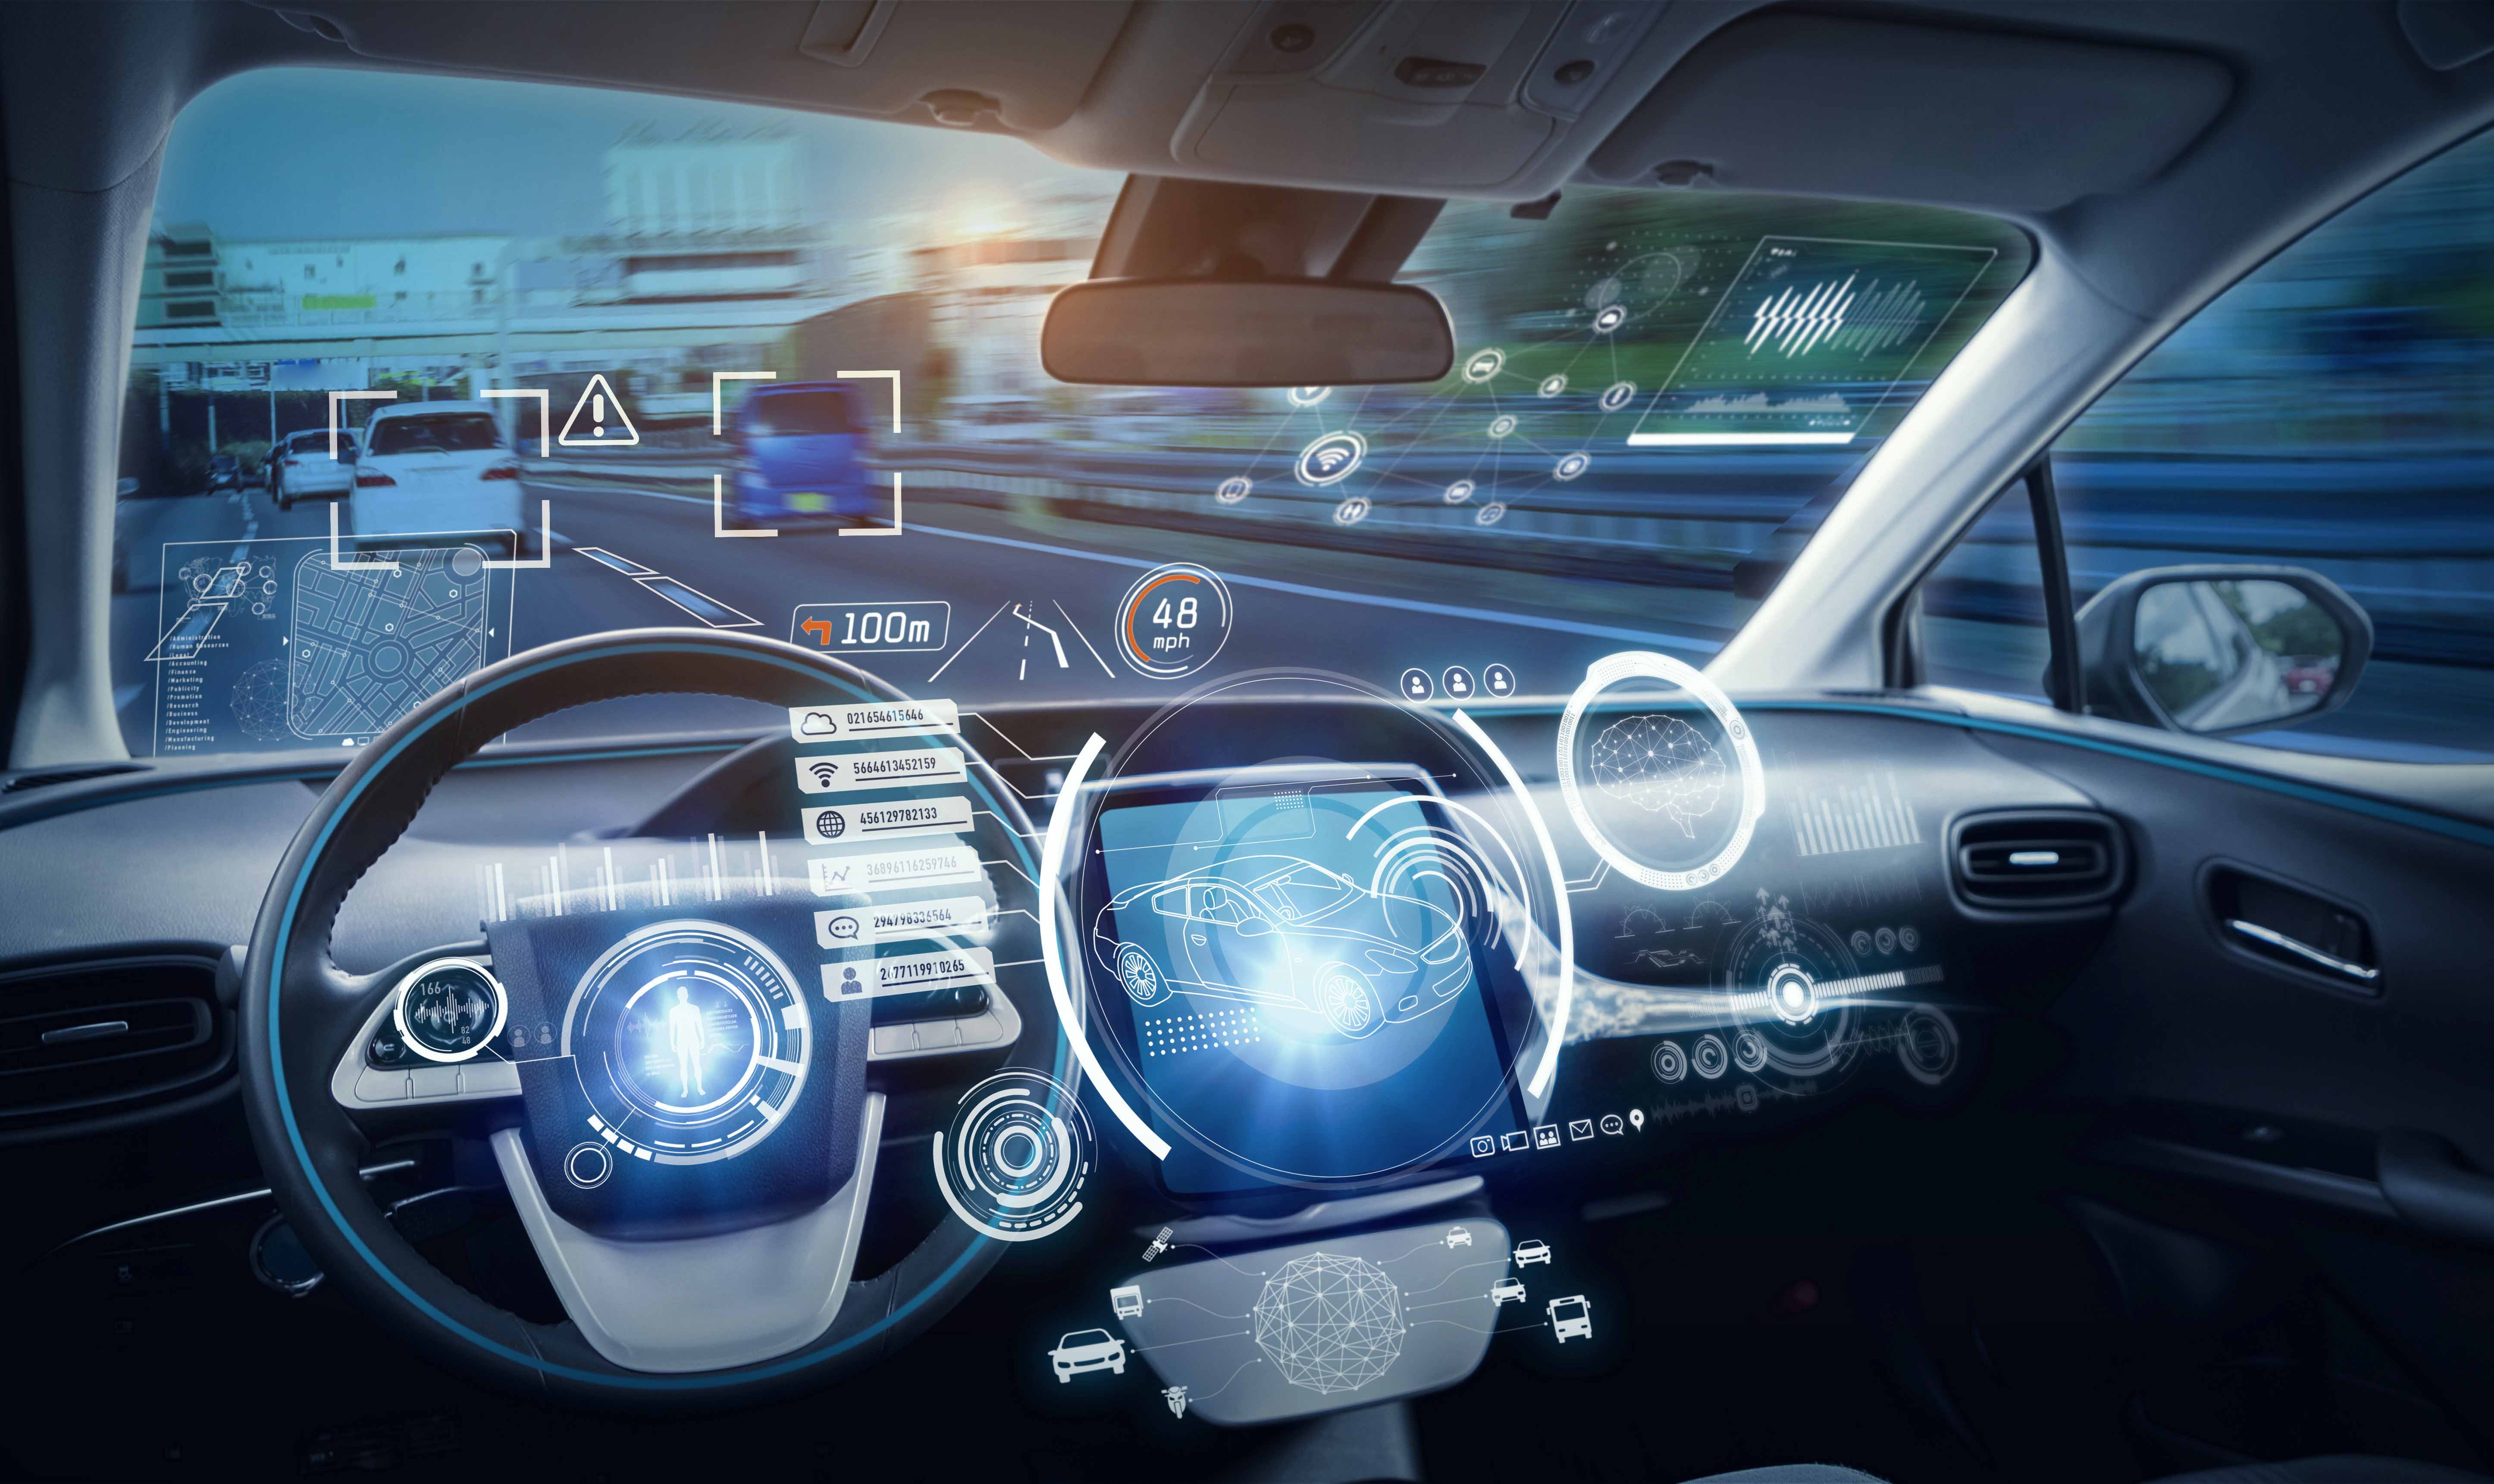 TTTech Auto provides solutions for the challenges of future vehicle generations